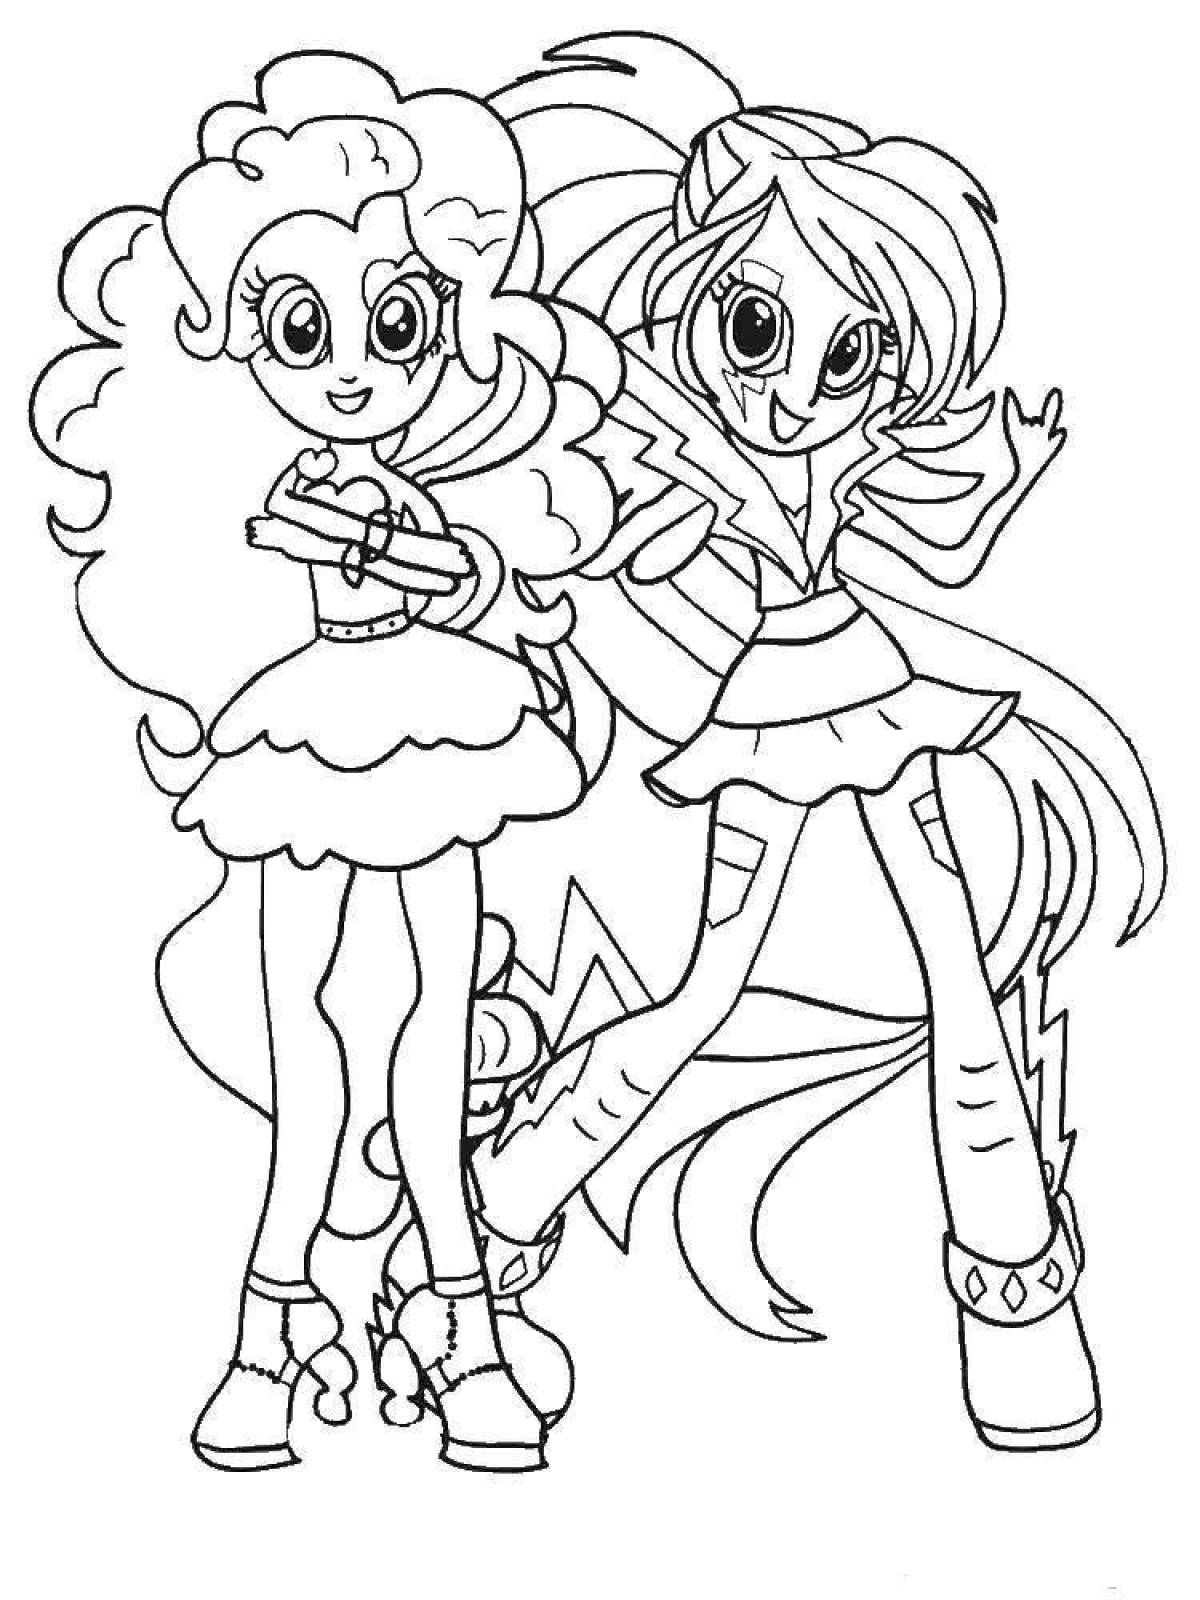 Coloring page playful pony people